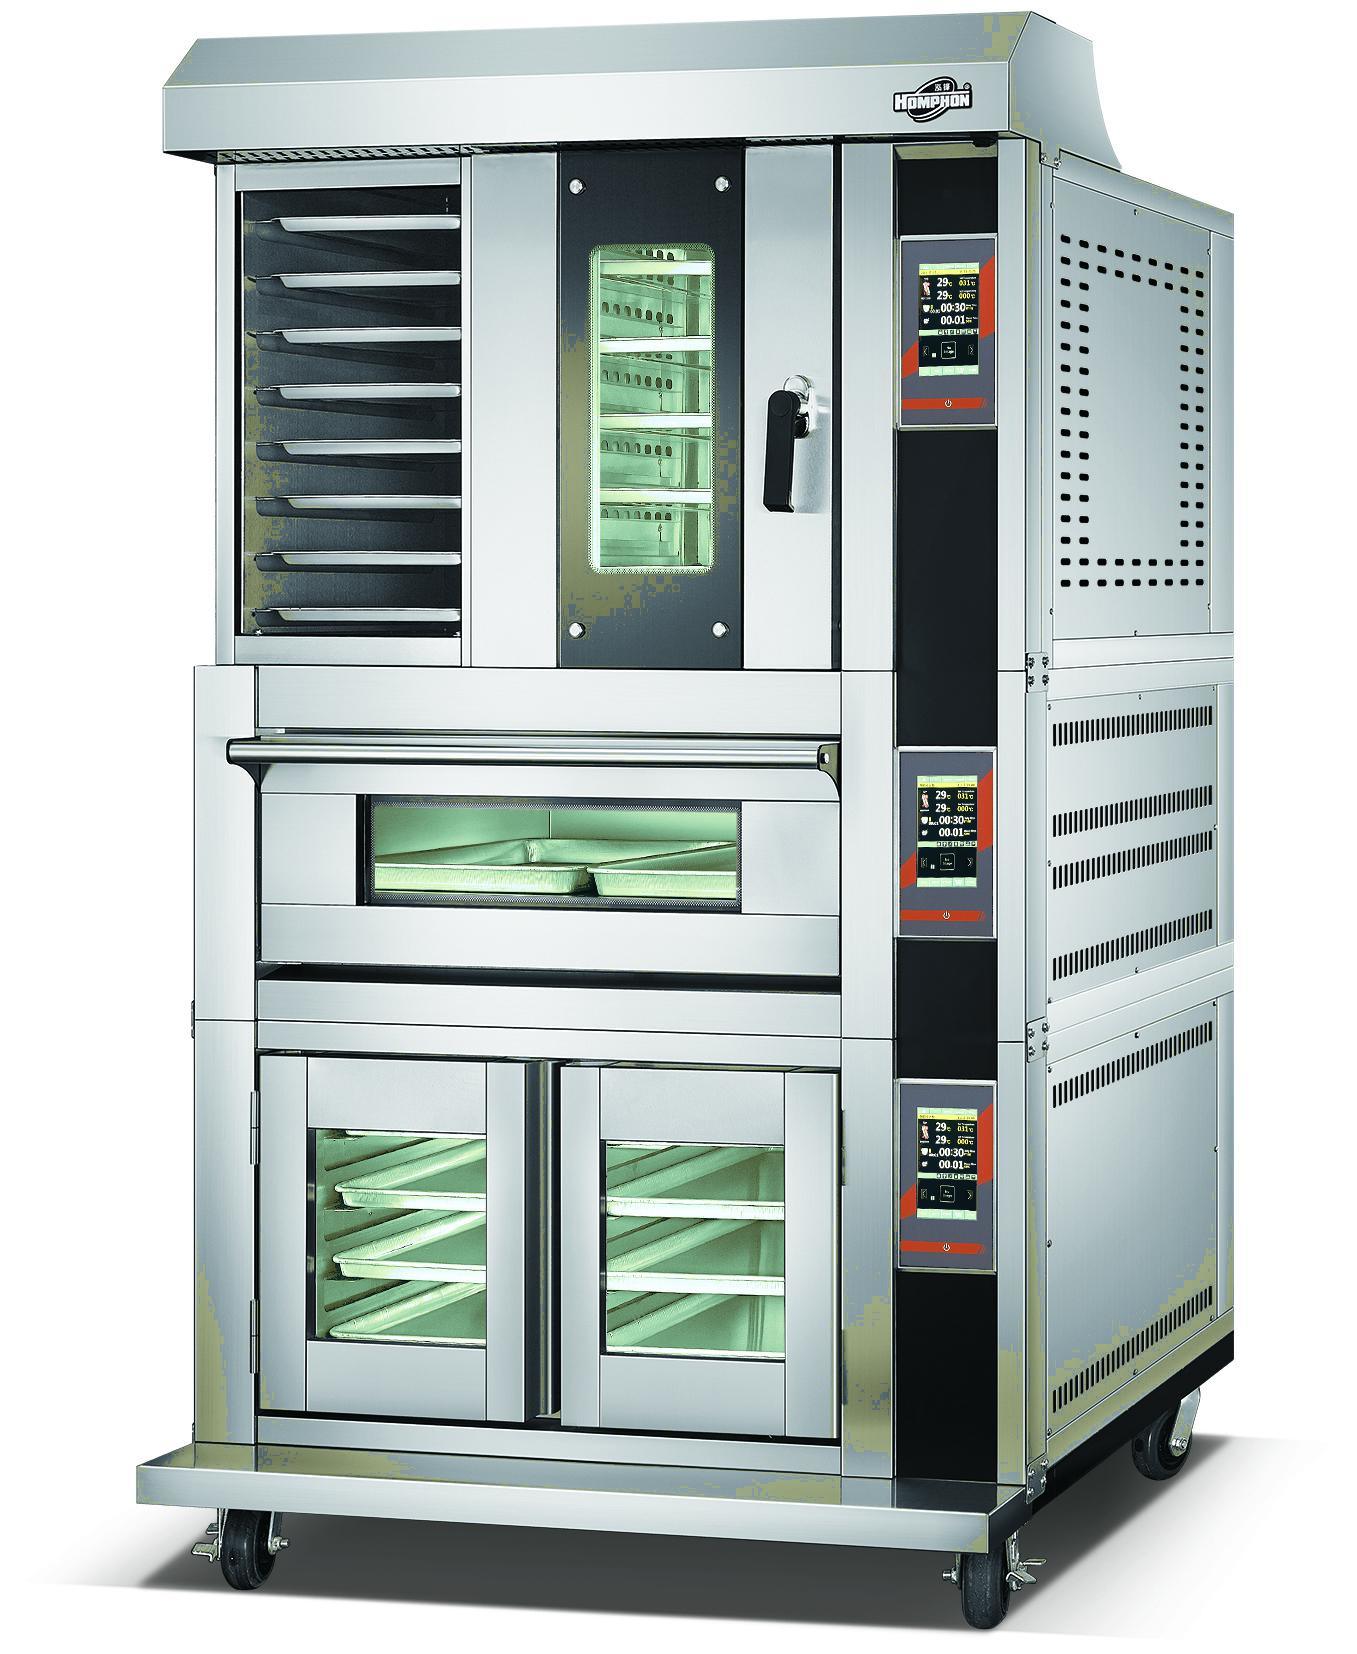 Hot – Air Convection oven for sale